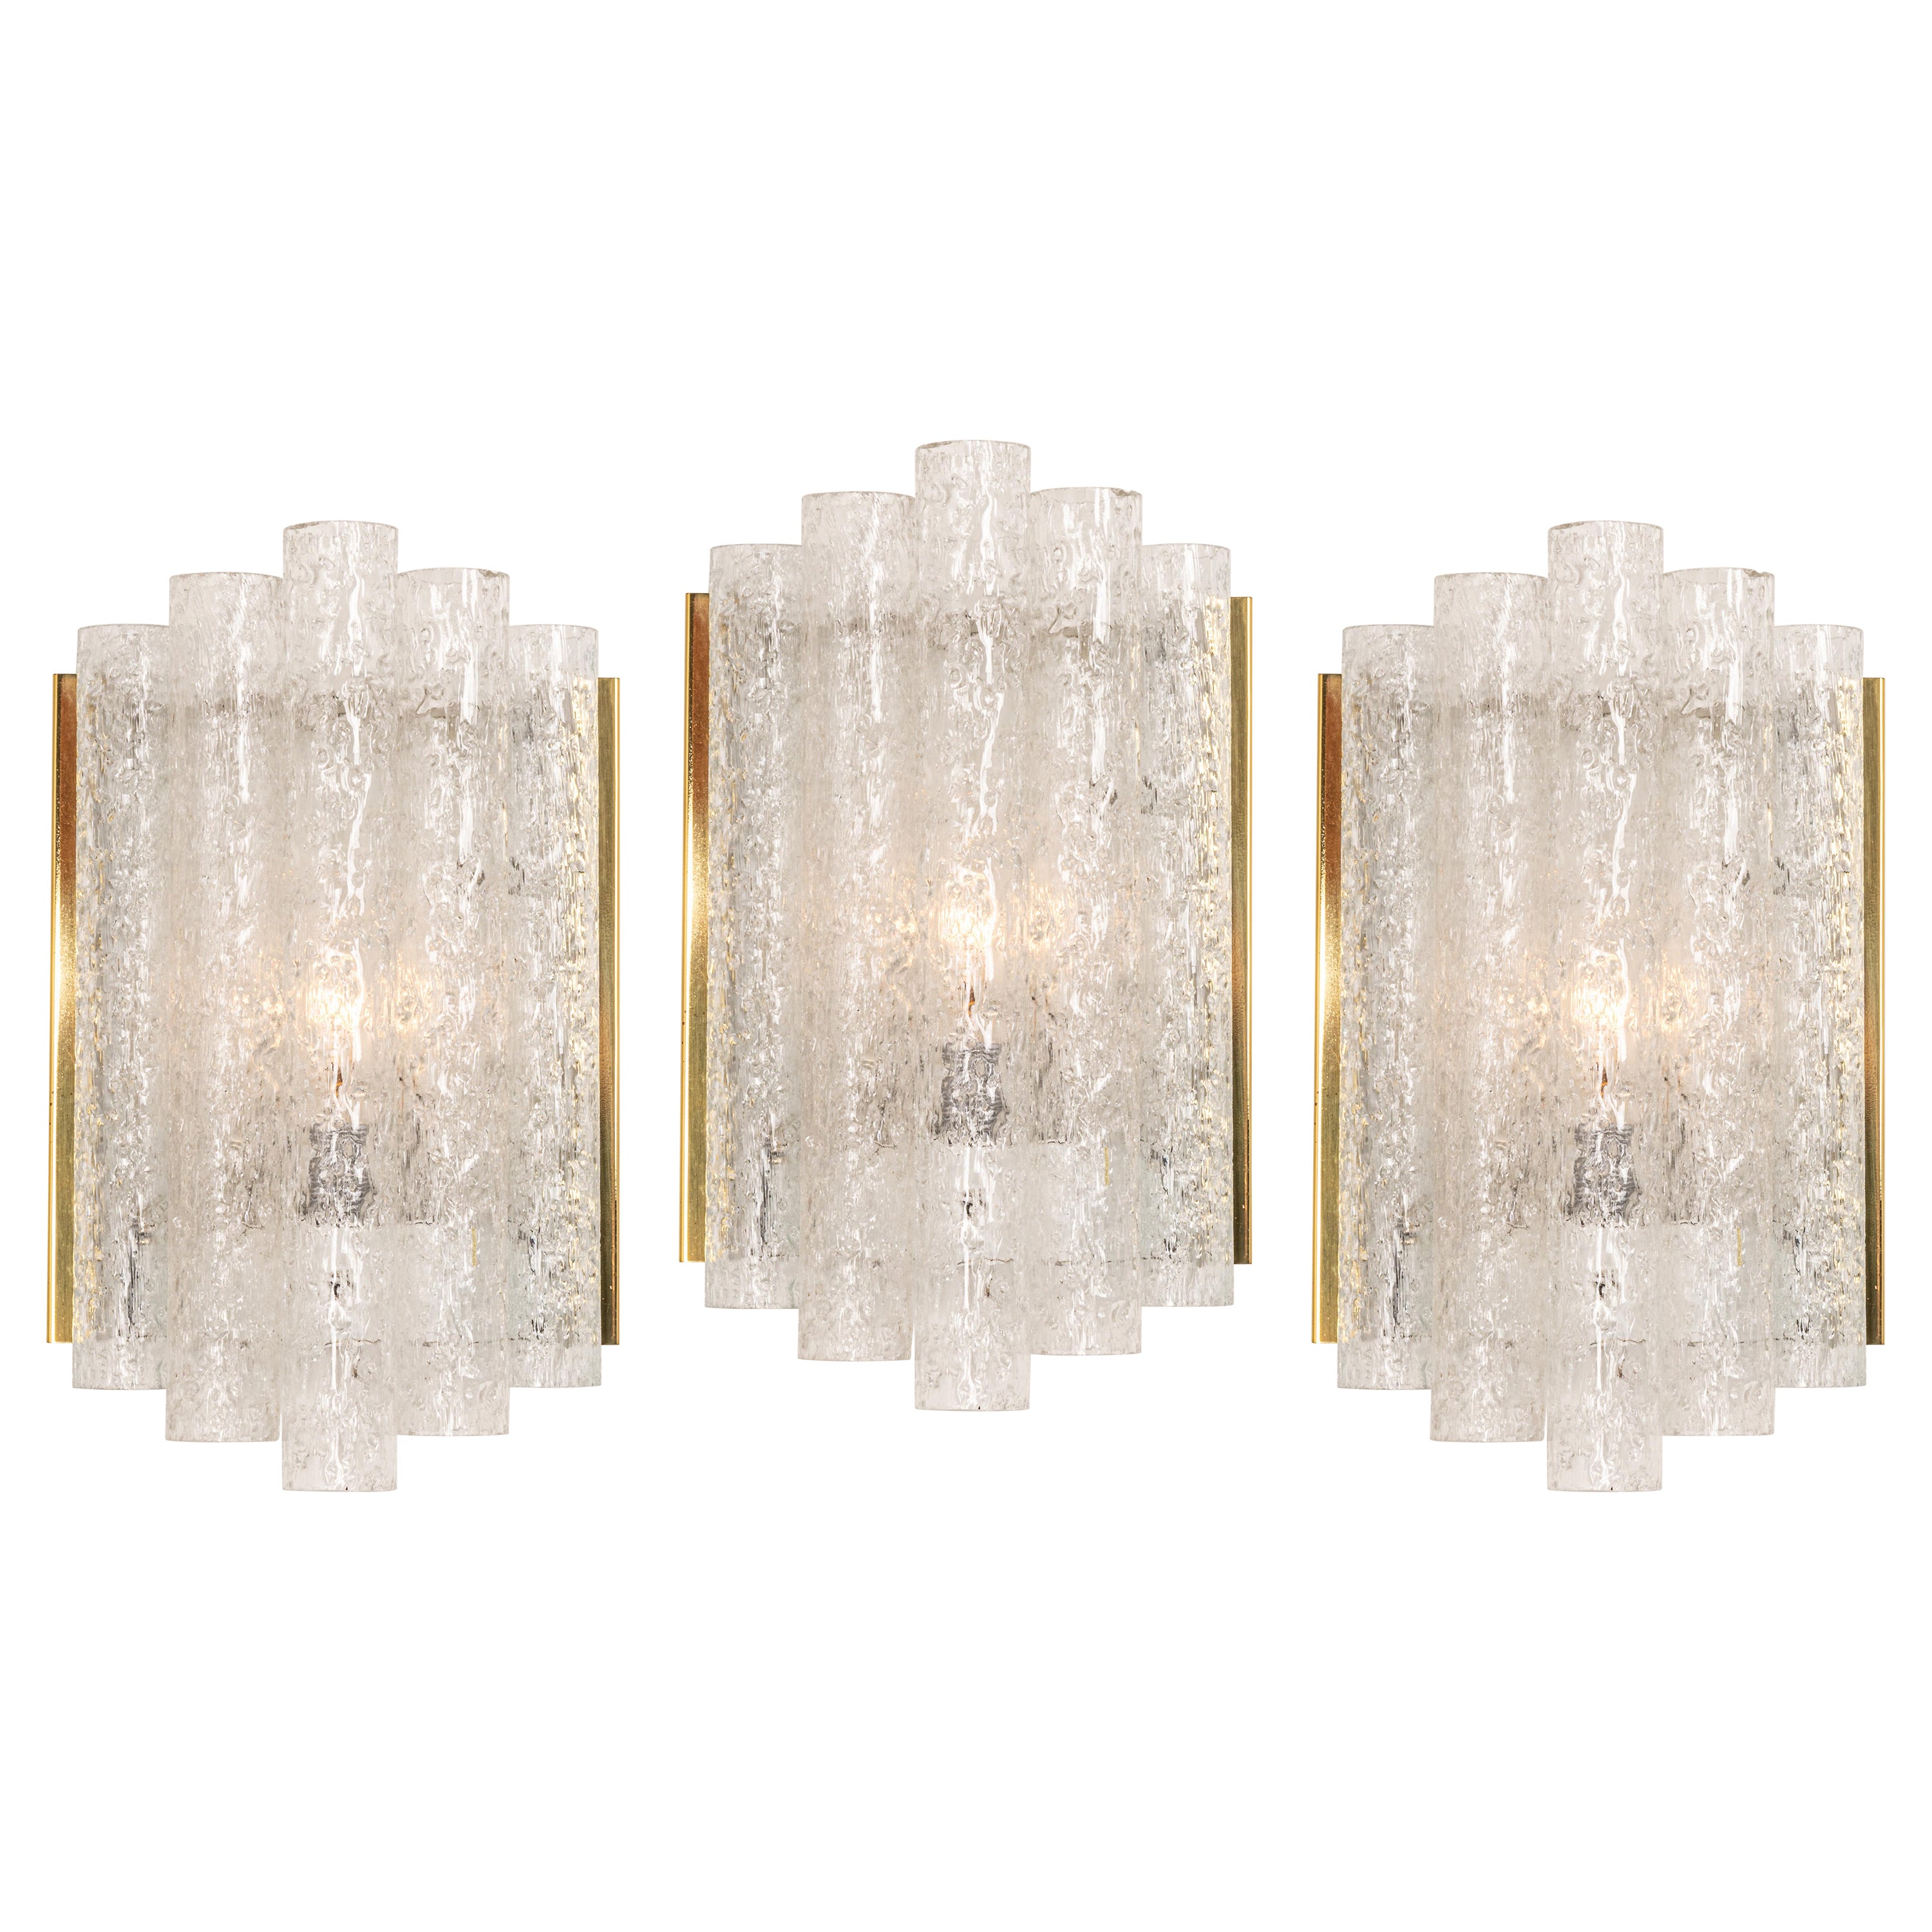 Pair of Brass or Ice Glass Wall Sconces by Doria, Germany, 1960s